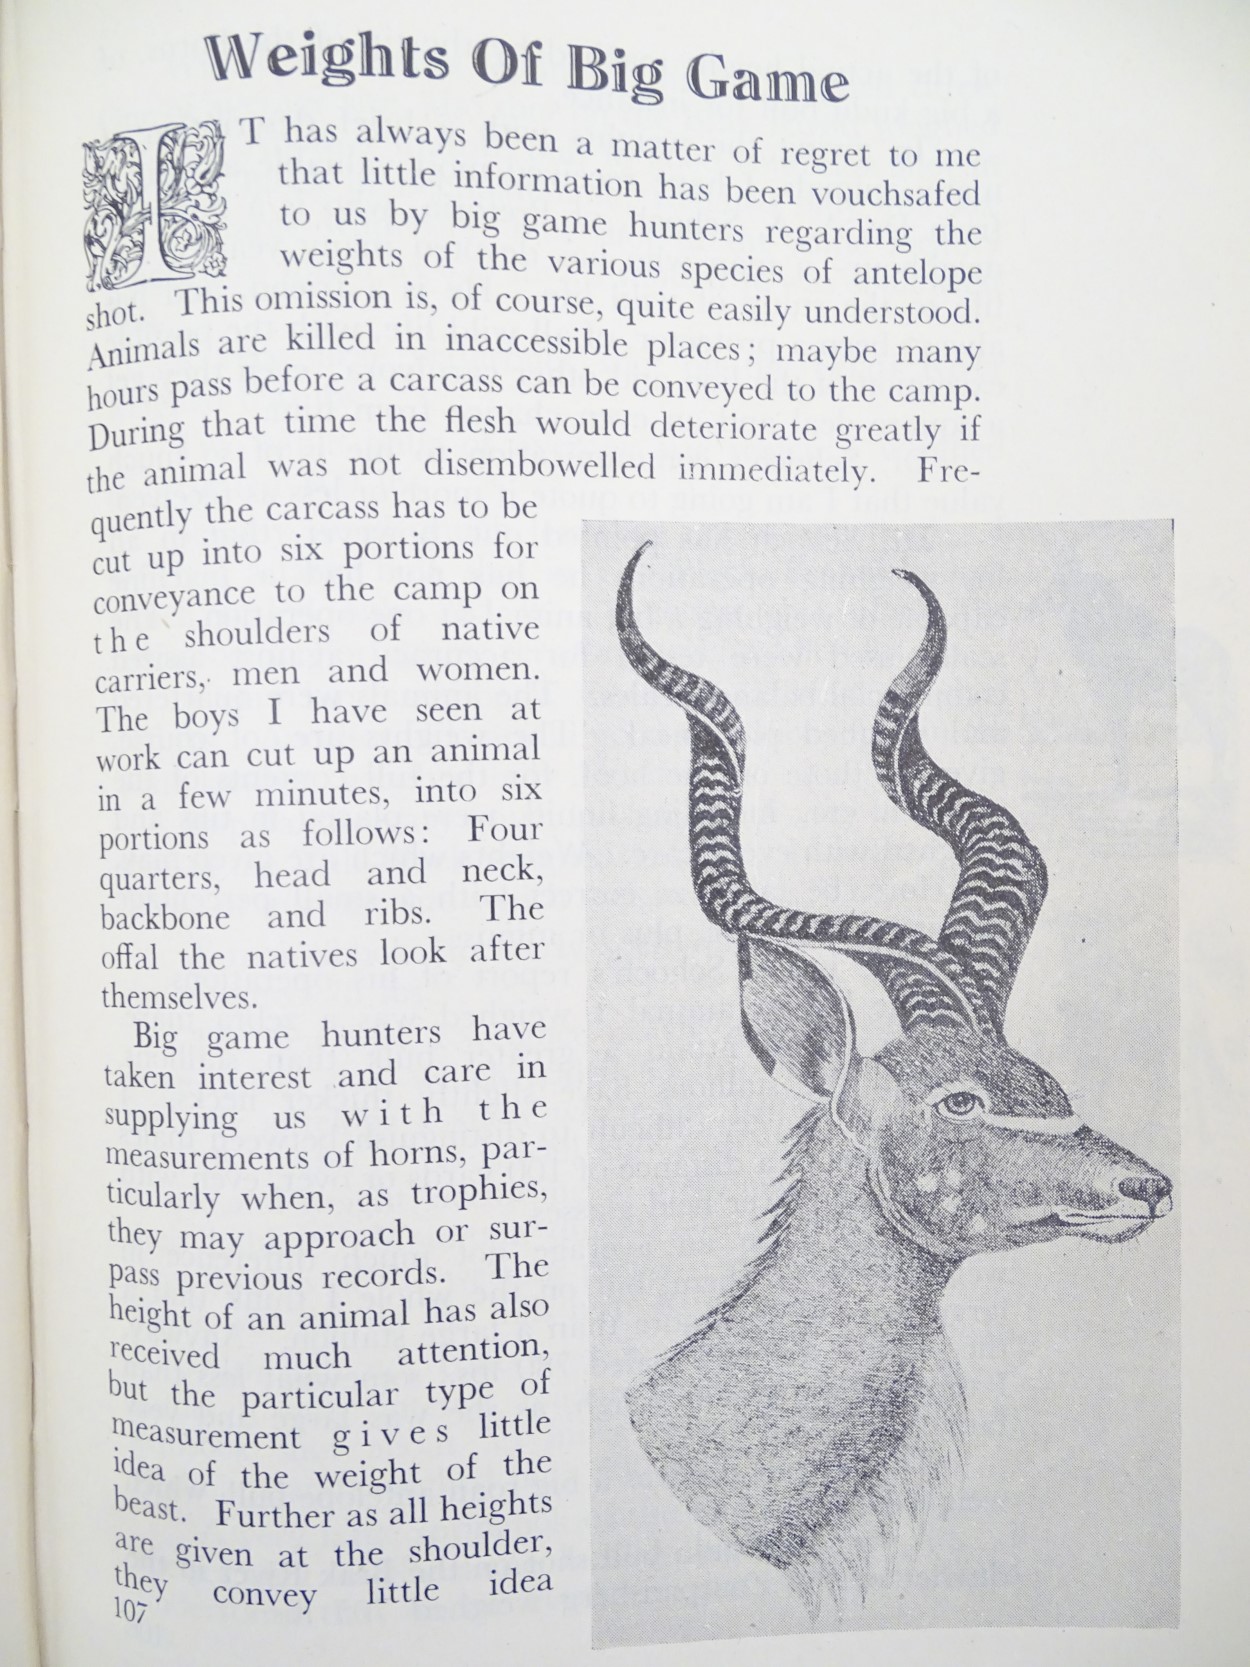 Book: 'The Call of the Bushveld' by A. C. White, published by A. C. White P. & P. Co. Ltd. - Image 5 of 6